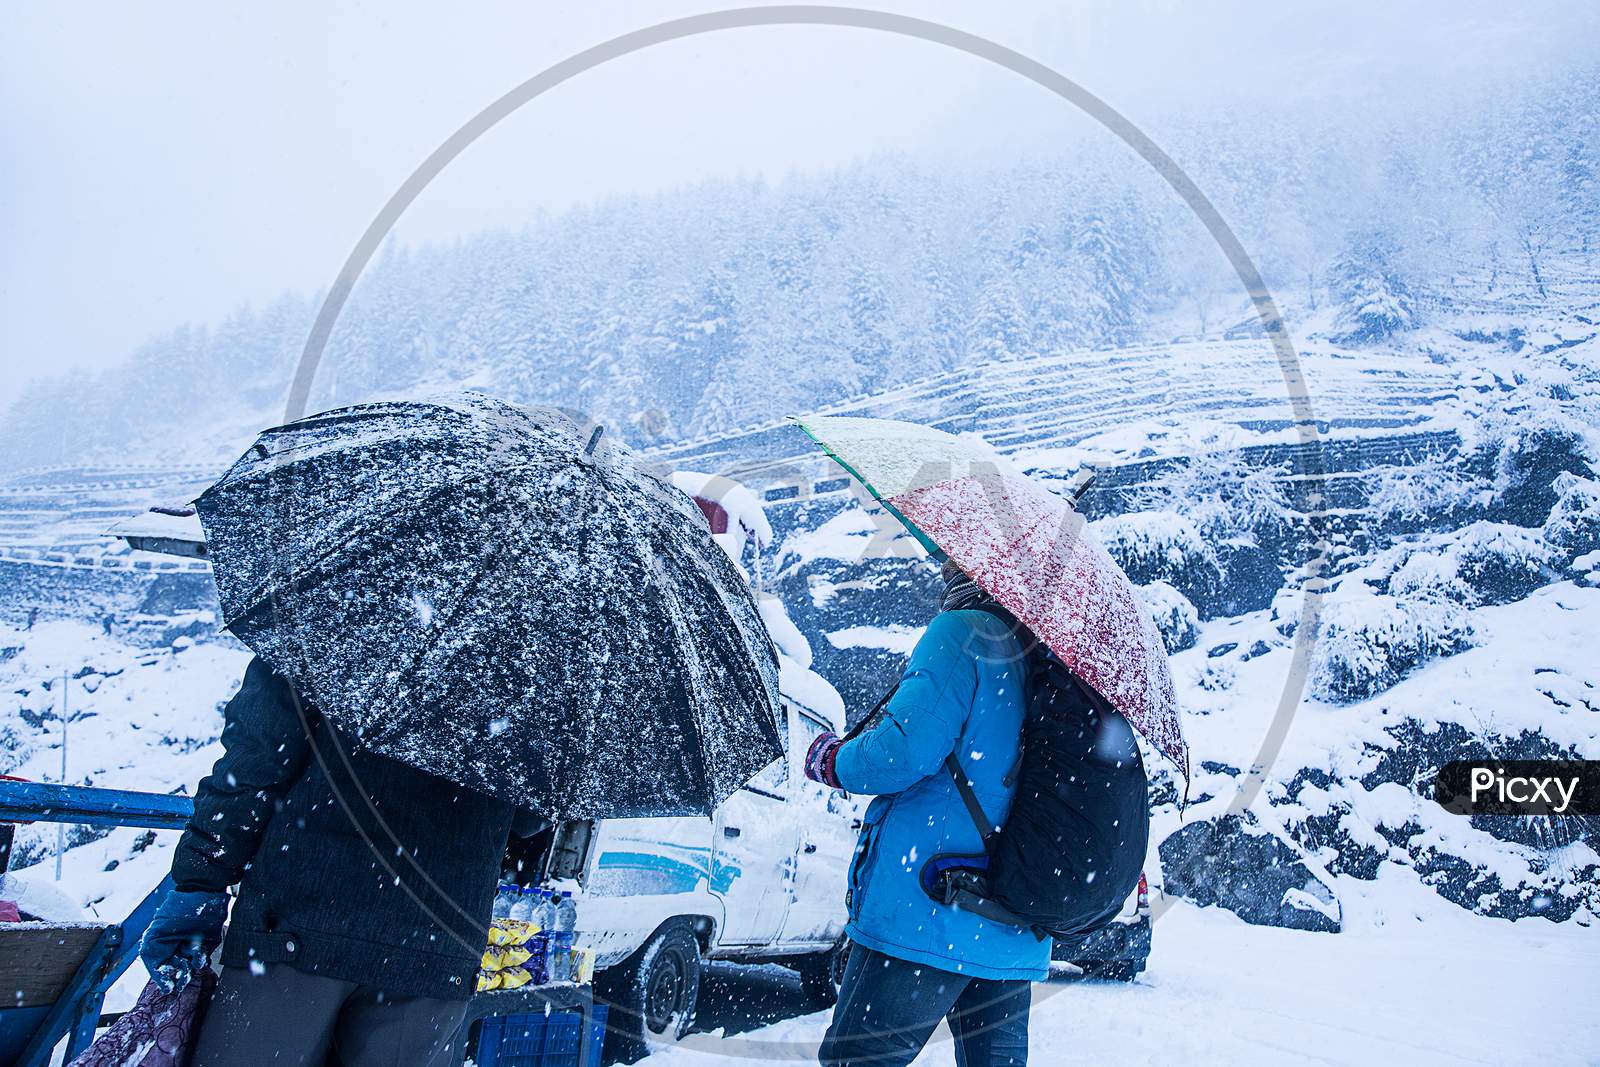 Two Guys With Umbrella Walking At Heavy Snowy Day In The Himachal. Snowfall Winter Concept, Wide Angle Shot - Image